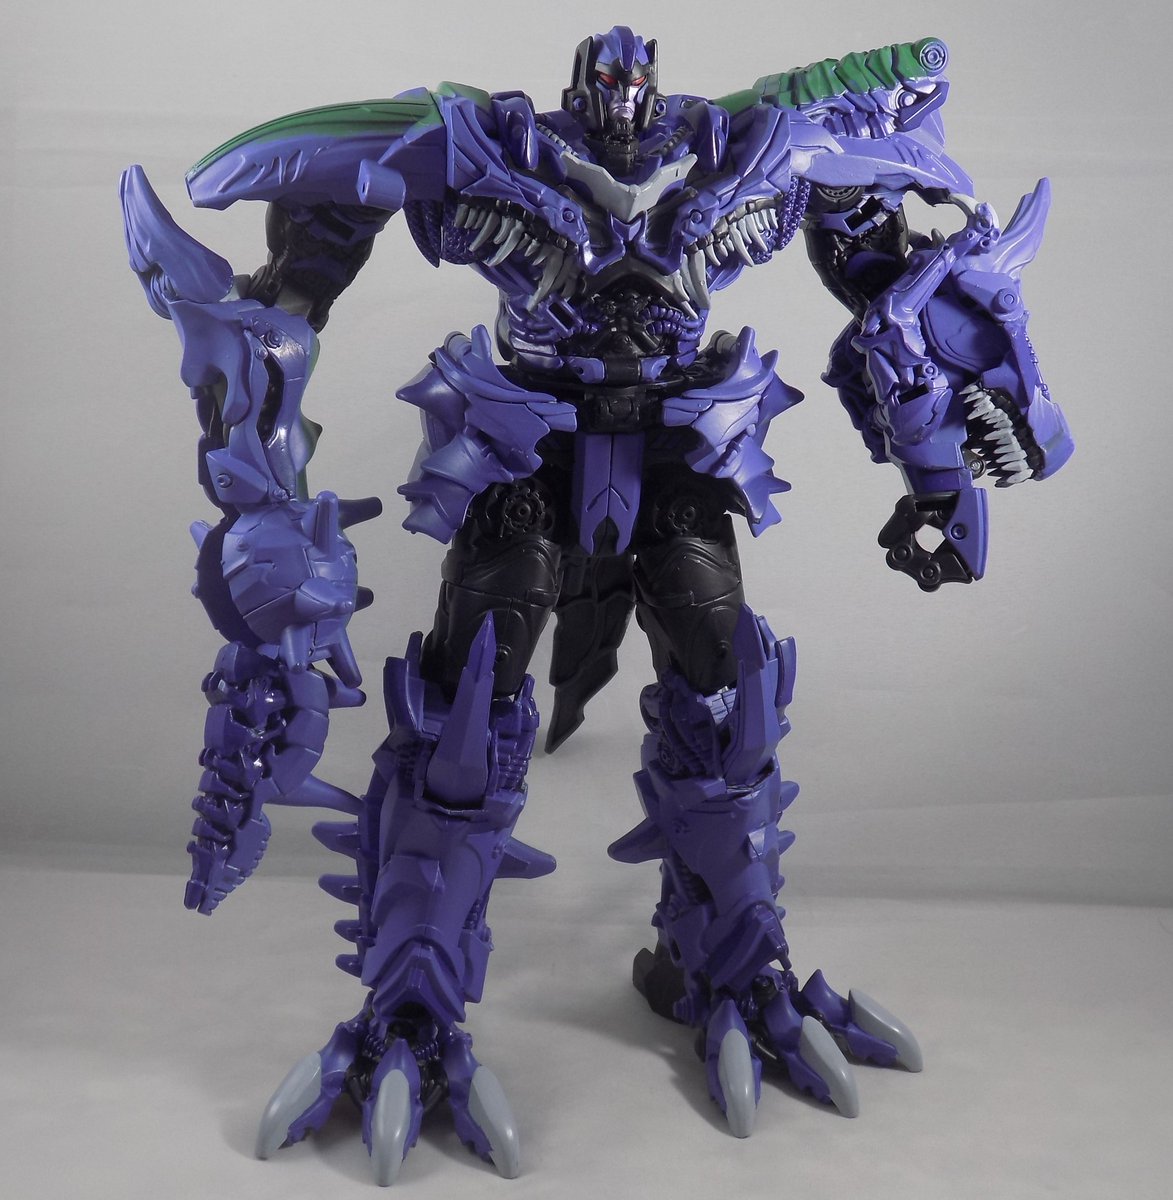 Minor Repaint Movieverse Beast Wars Megatron Tfw2005 The 2005 Boards - gameboy color transformers beast wars roblox